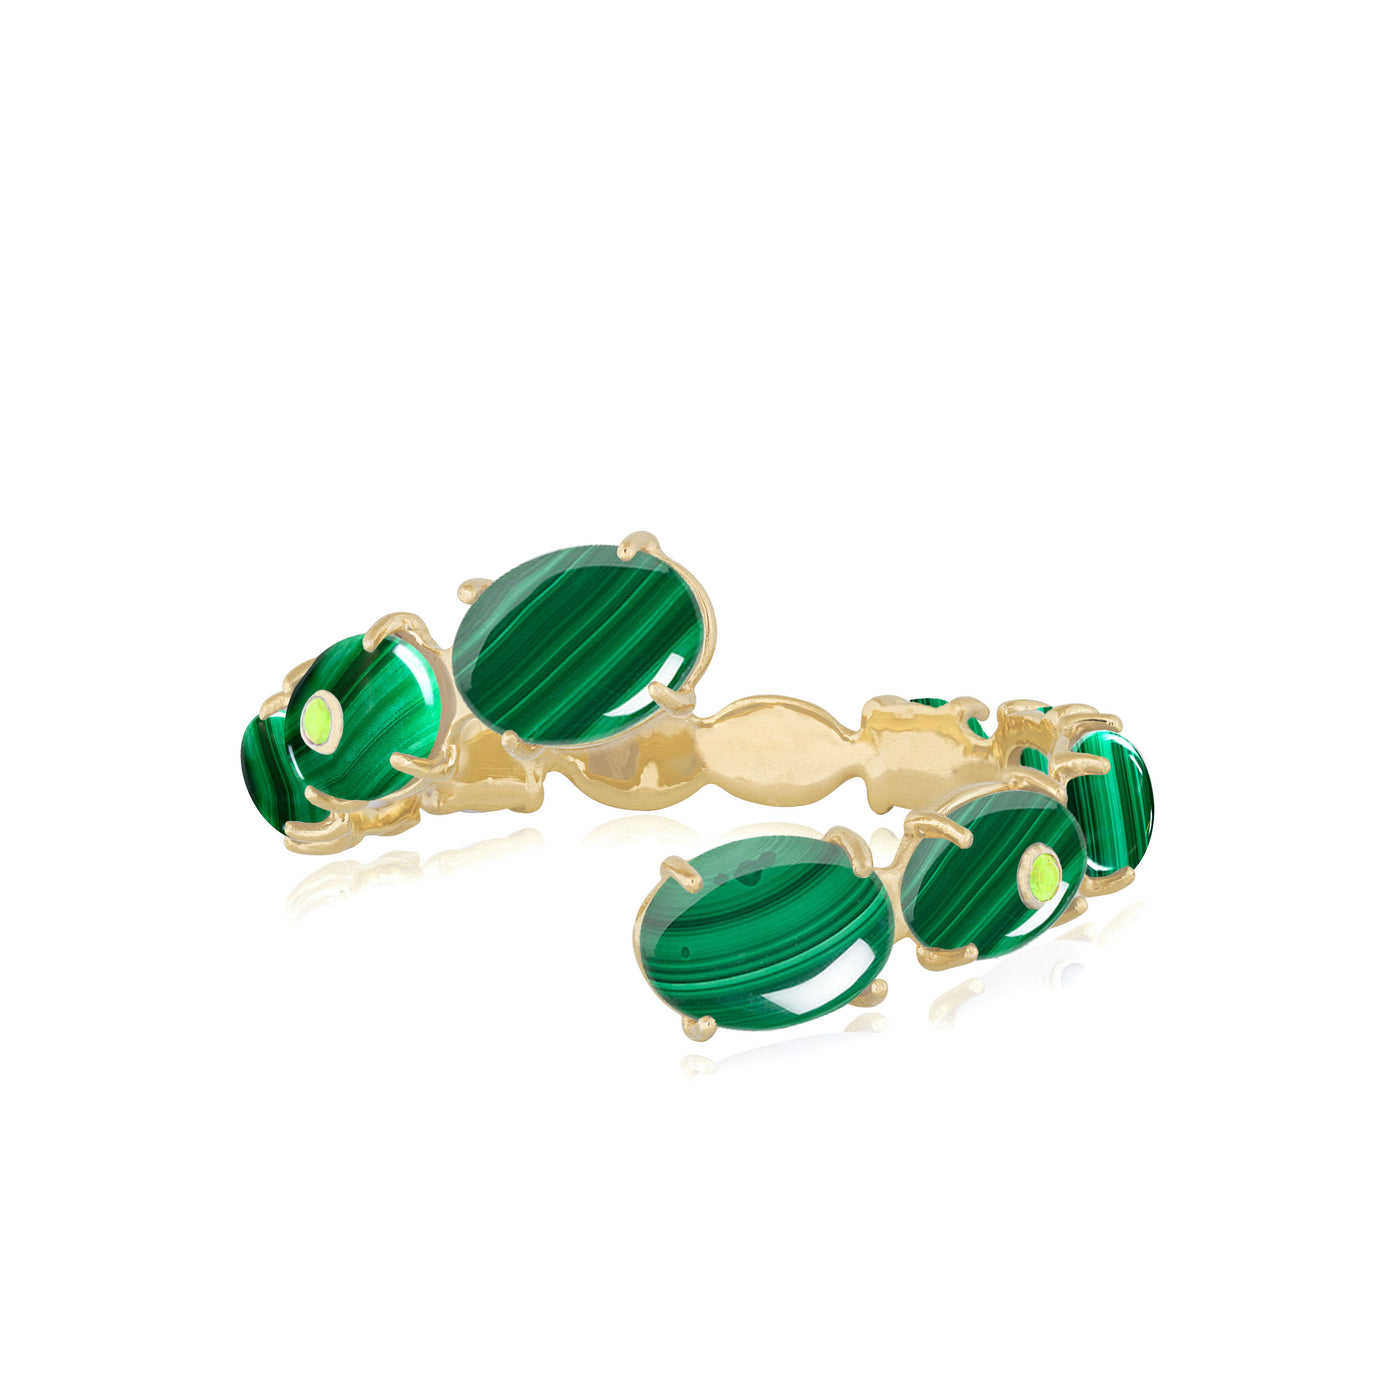 fine jewelry cuff bracelet in gold with green malachite and peridot gemstones from Atelier ORMAN